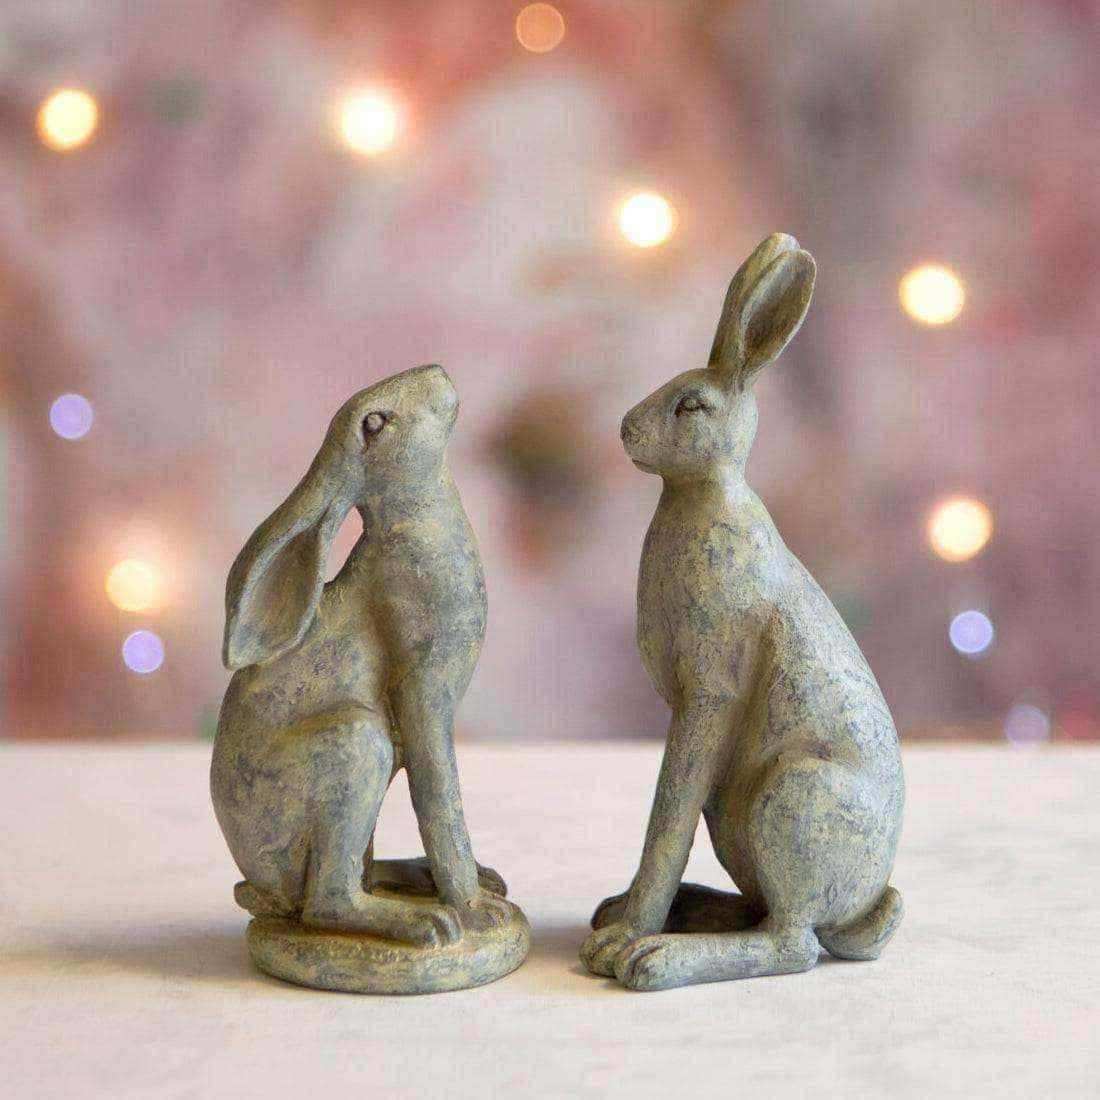 Two Rustic Sitting Hare Ornament Set - The Farthing